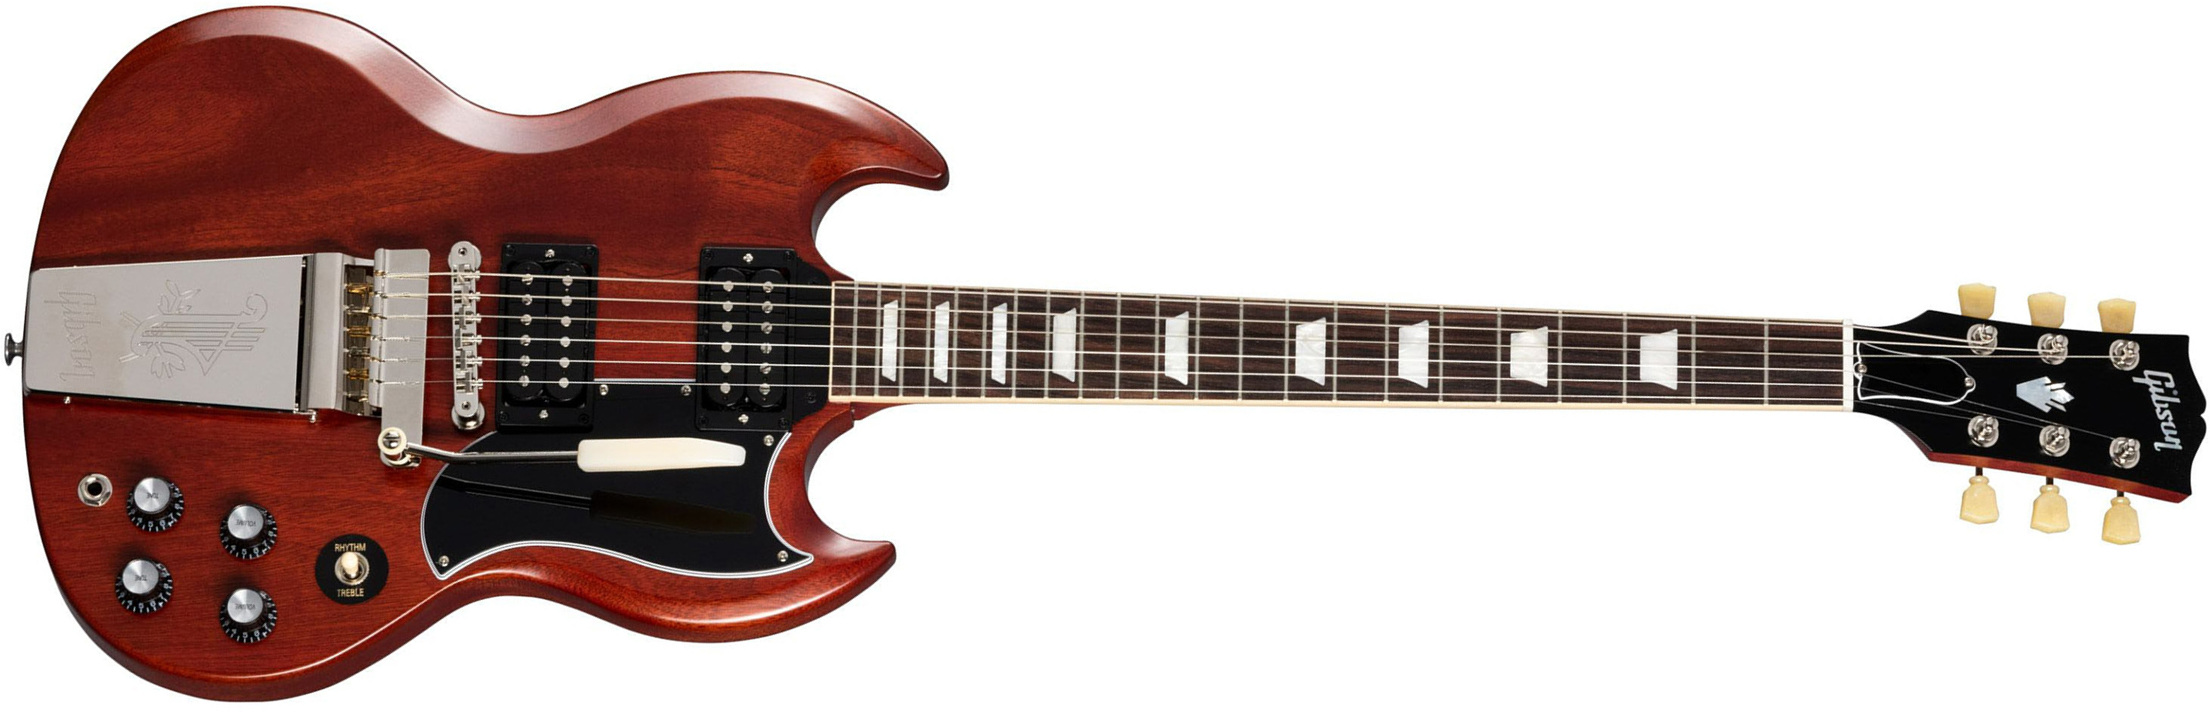 Gibson Sg Standard 1961 Faded Maestro Vibrola Original 2h Trem Rw - Vintage Cherry - Double cut electric guitar - Main picture